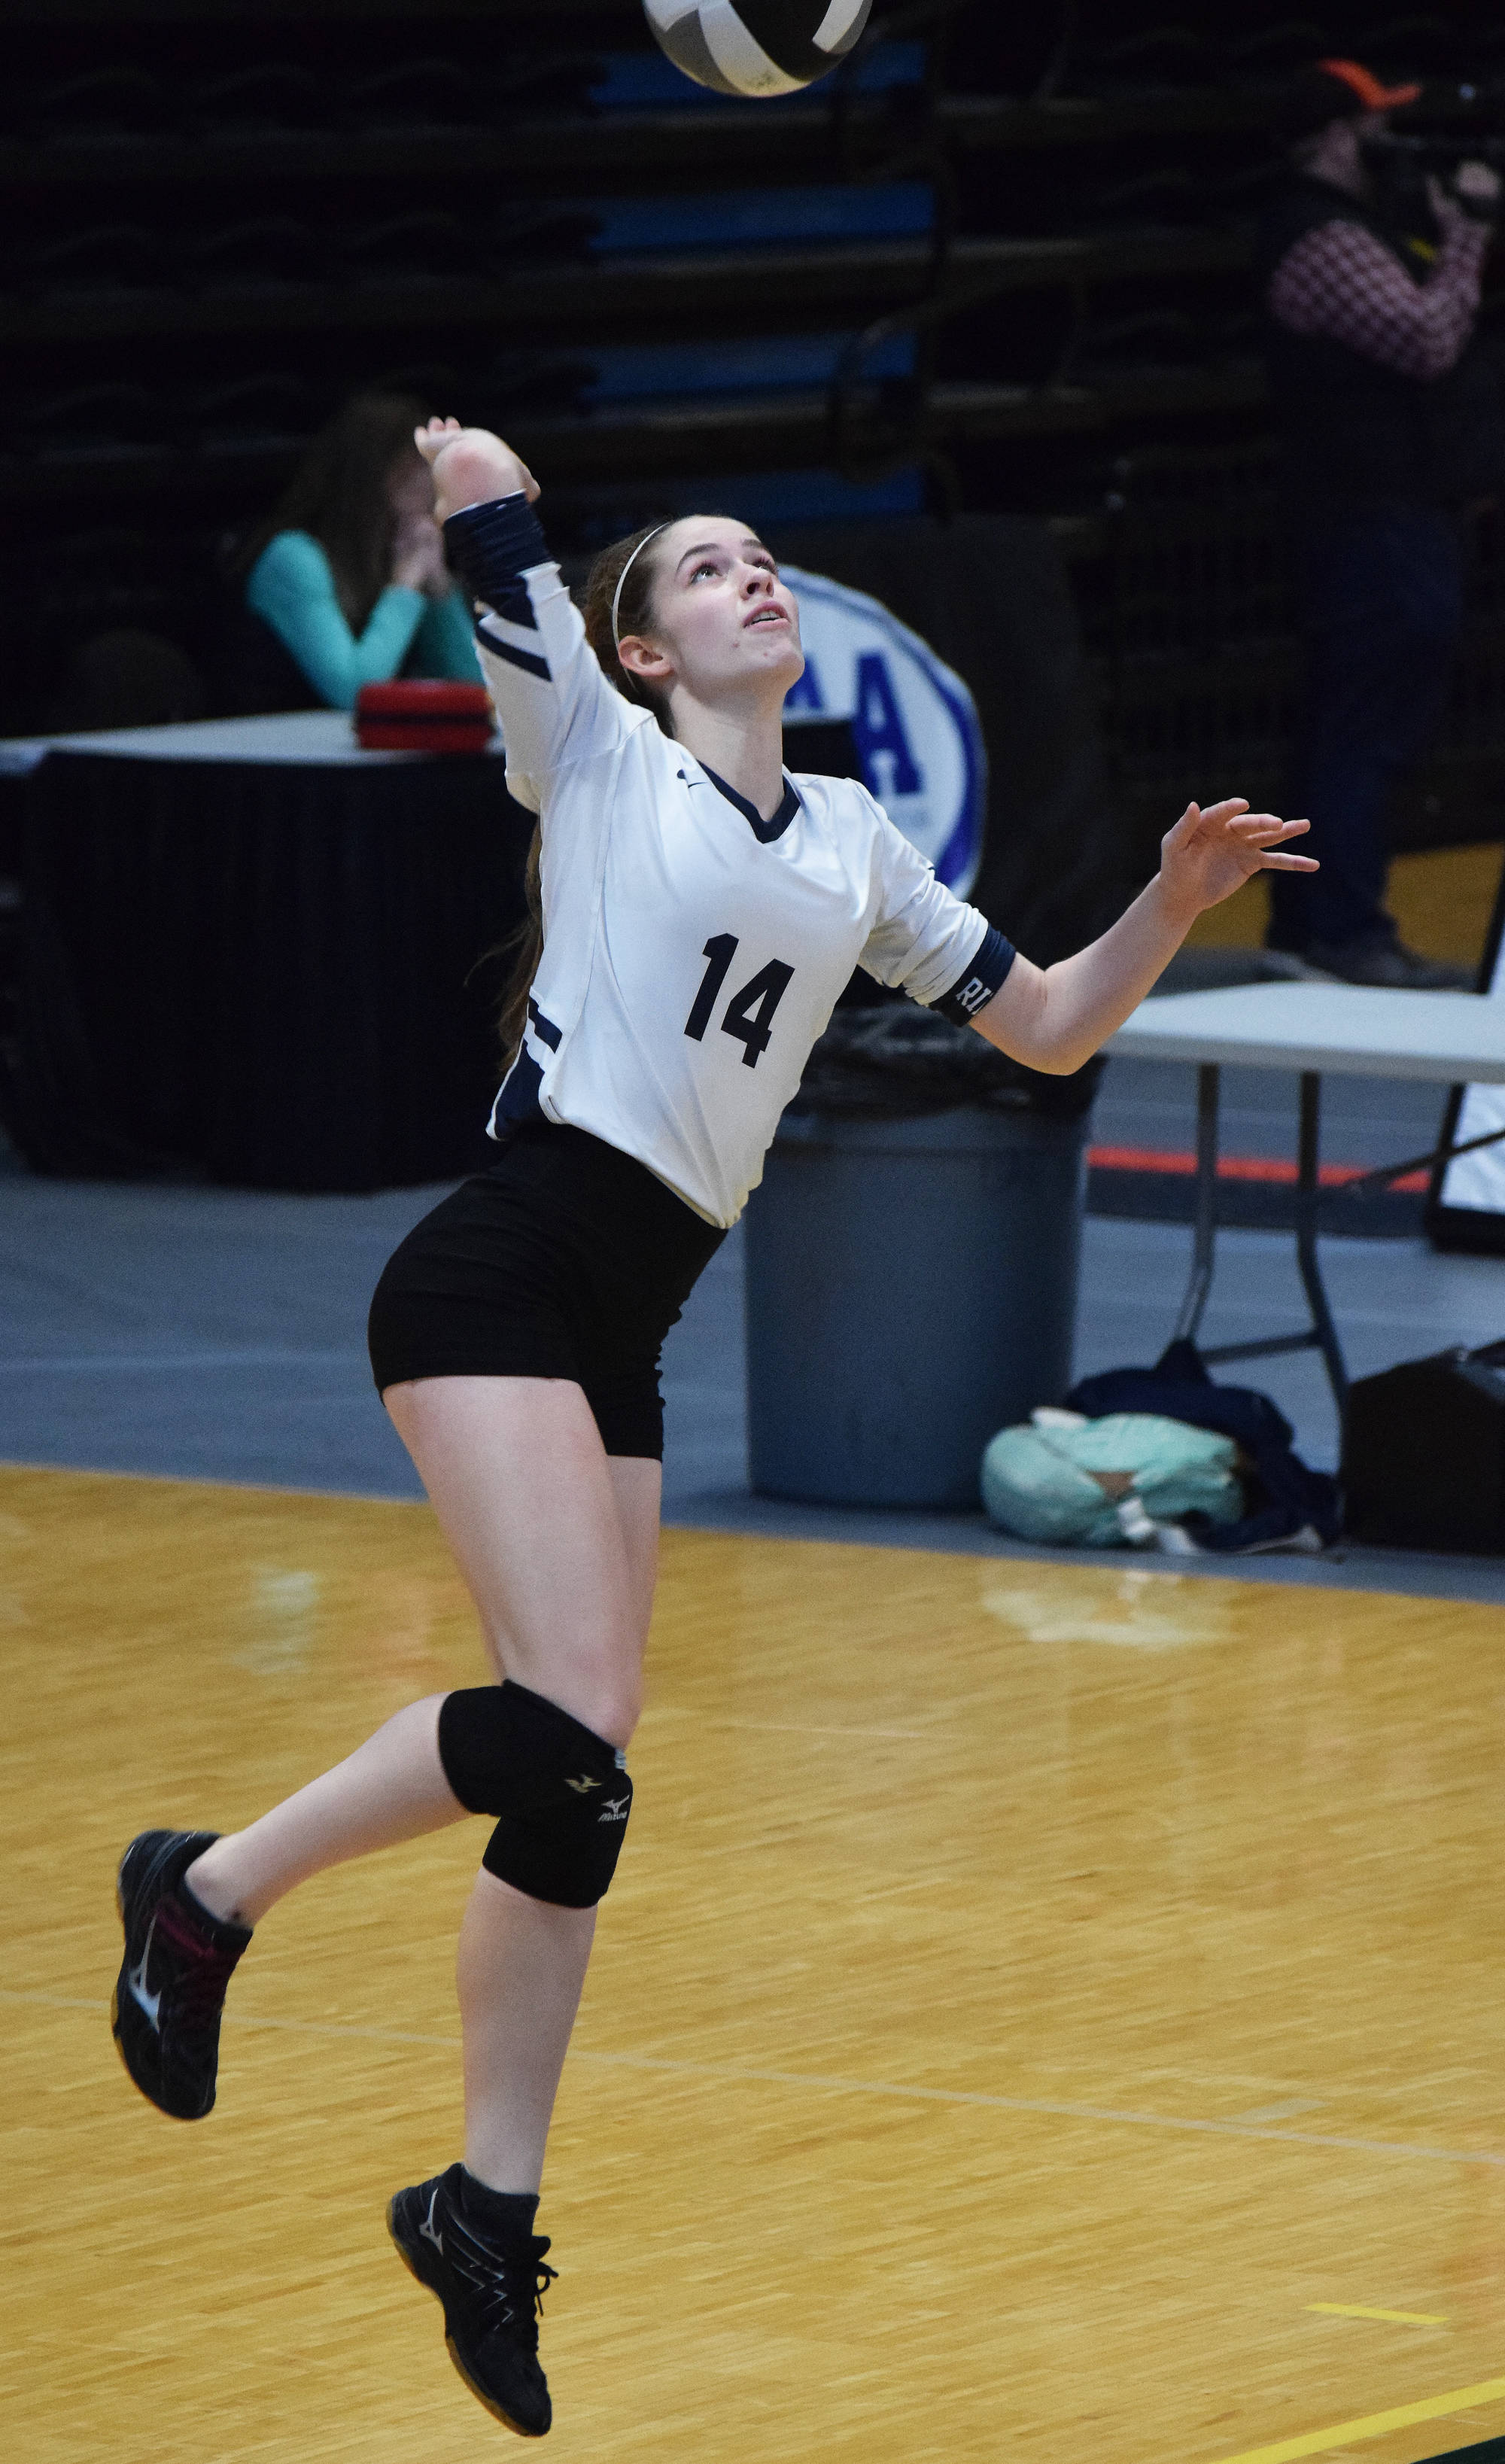 Homer’s Laura Inama unleashes a serve against Barrow at the Class 3A state volleyball tournament Friday, Nov. 9, 2018 at the Alaska Airlines Center in Anchorage, Alaska. (Photo by Joey Klecka/Peninsula Clarion)